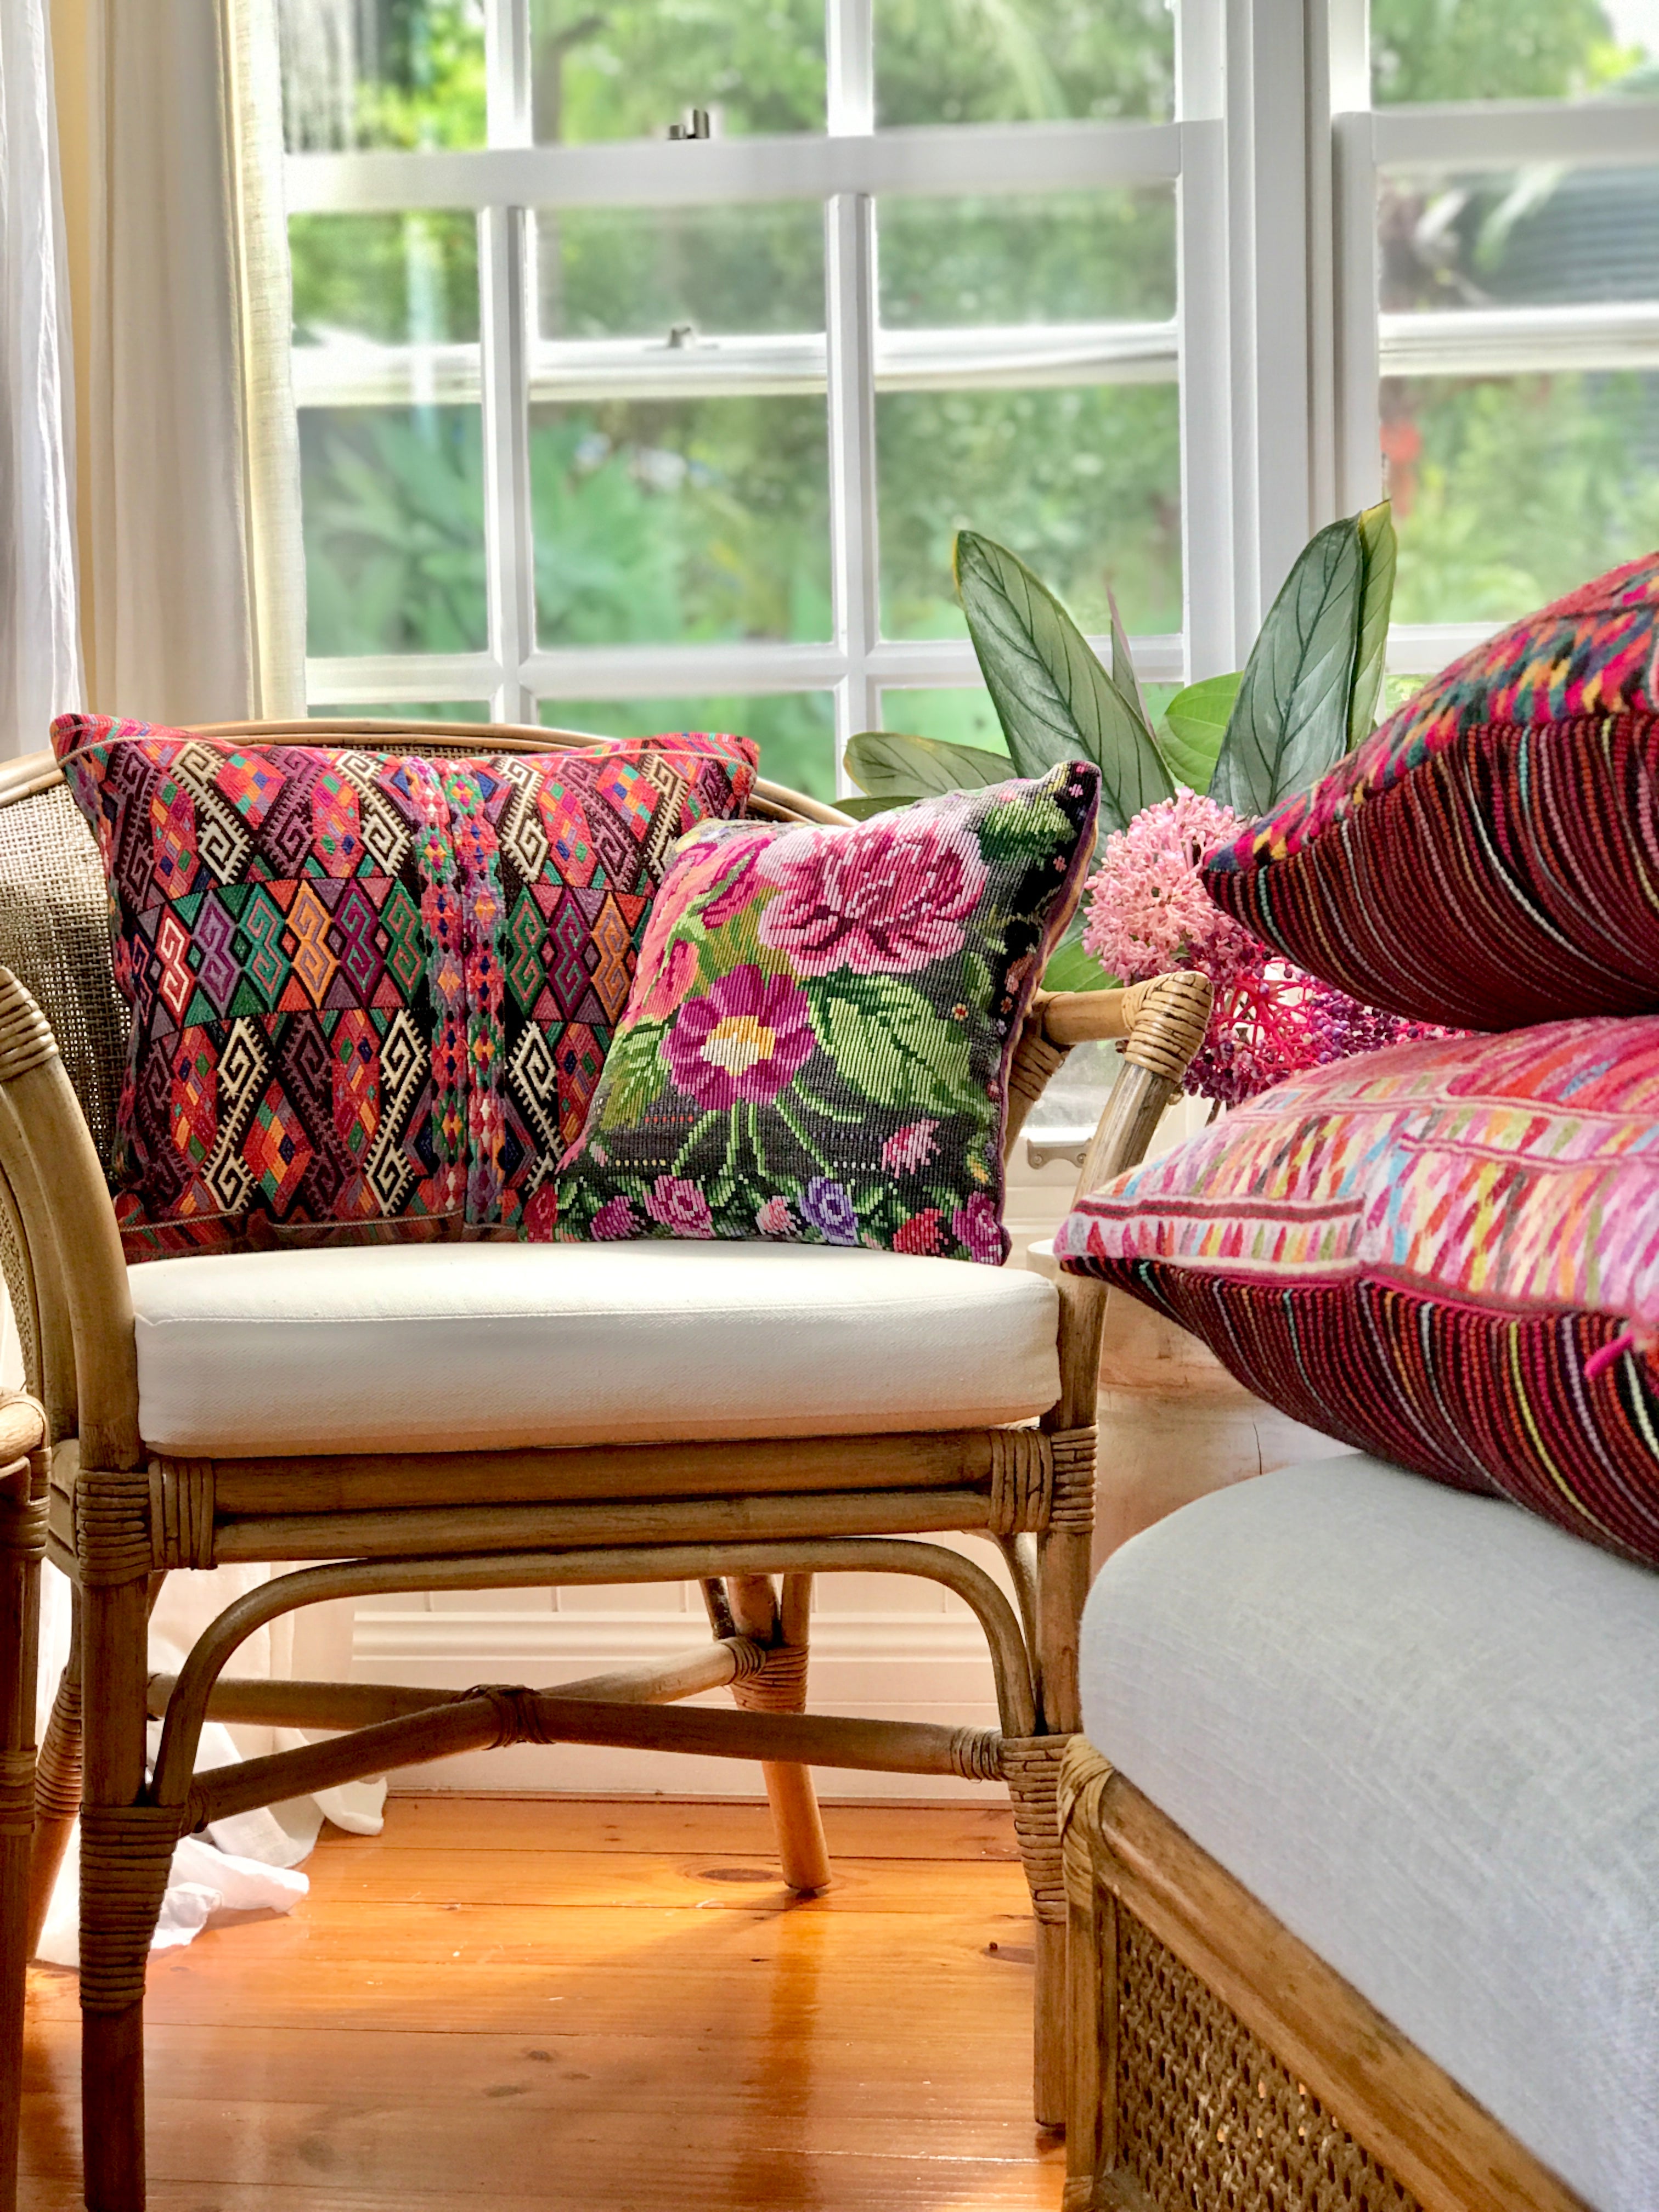 Bright pink vintage textile cushions